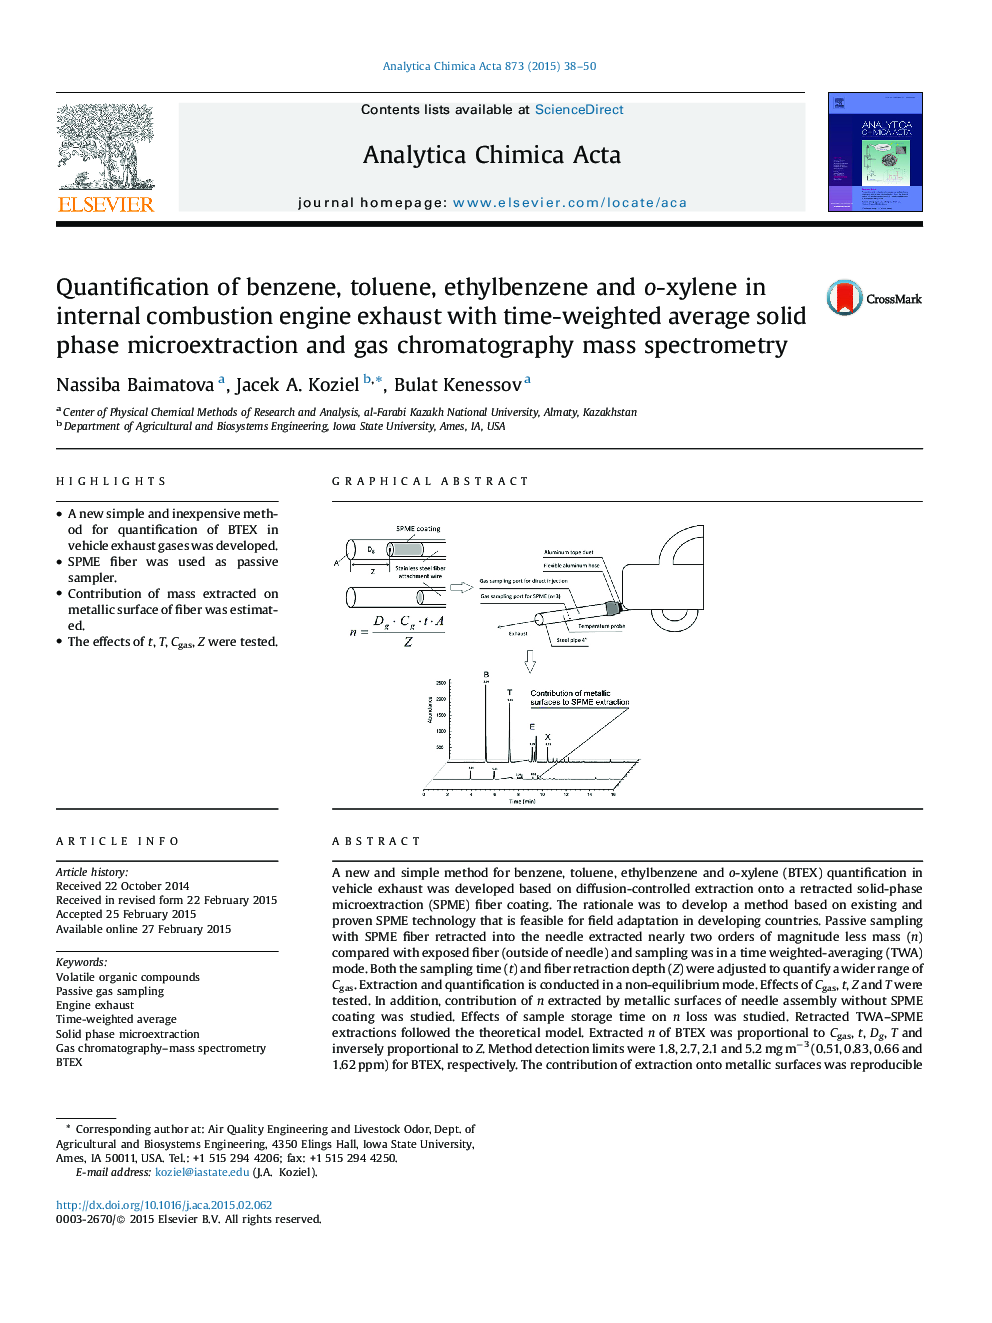 Quantification of benzene, toluene, ethylbenzene and o-xylene in internal combustion engine exhaust with time-weighted average solid phase microextraction and gas chromatography mass spectrometry